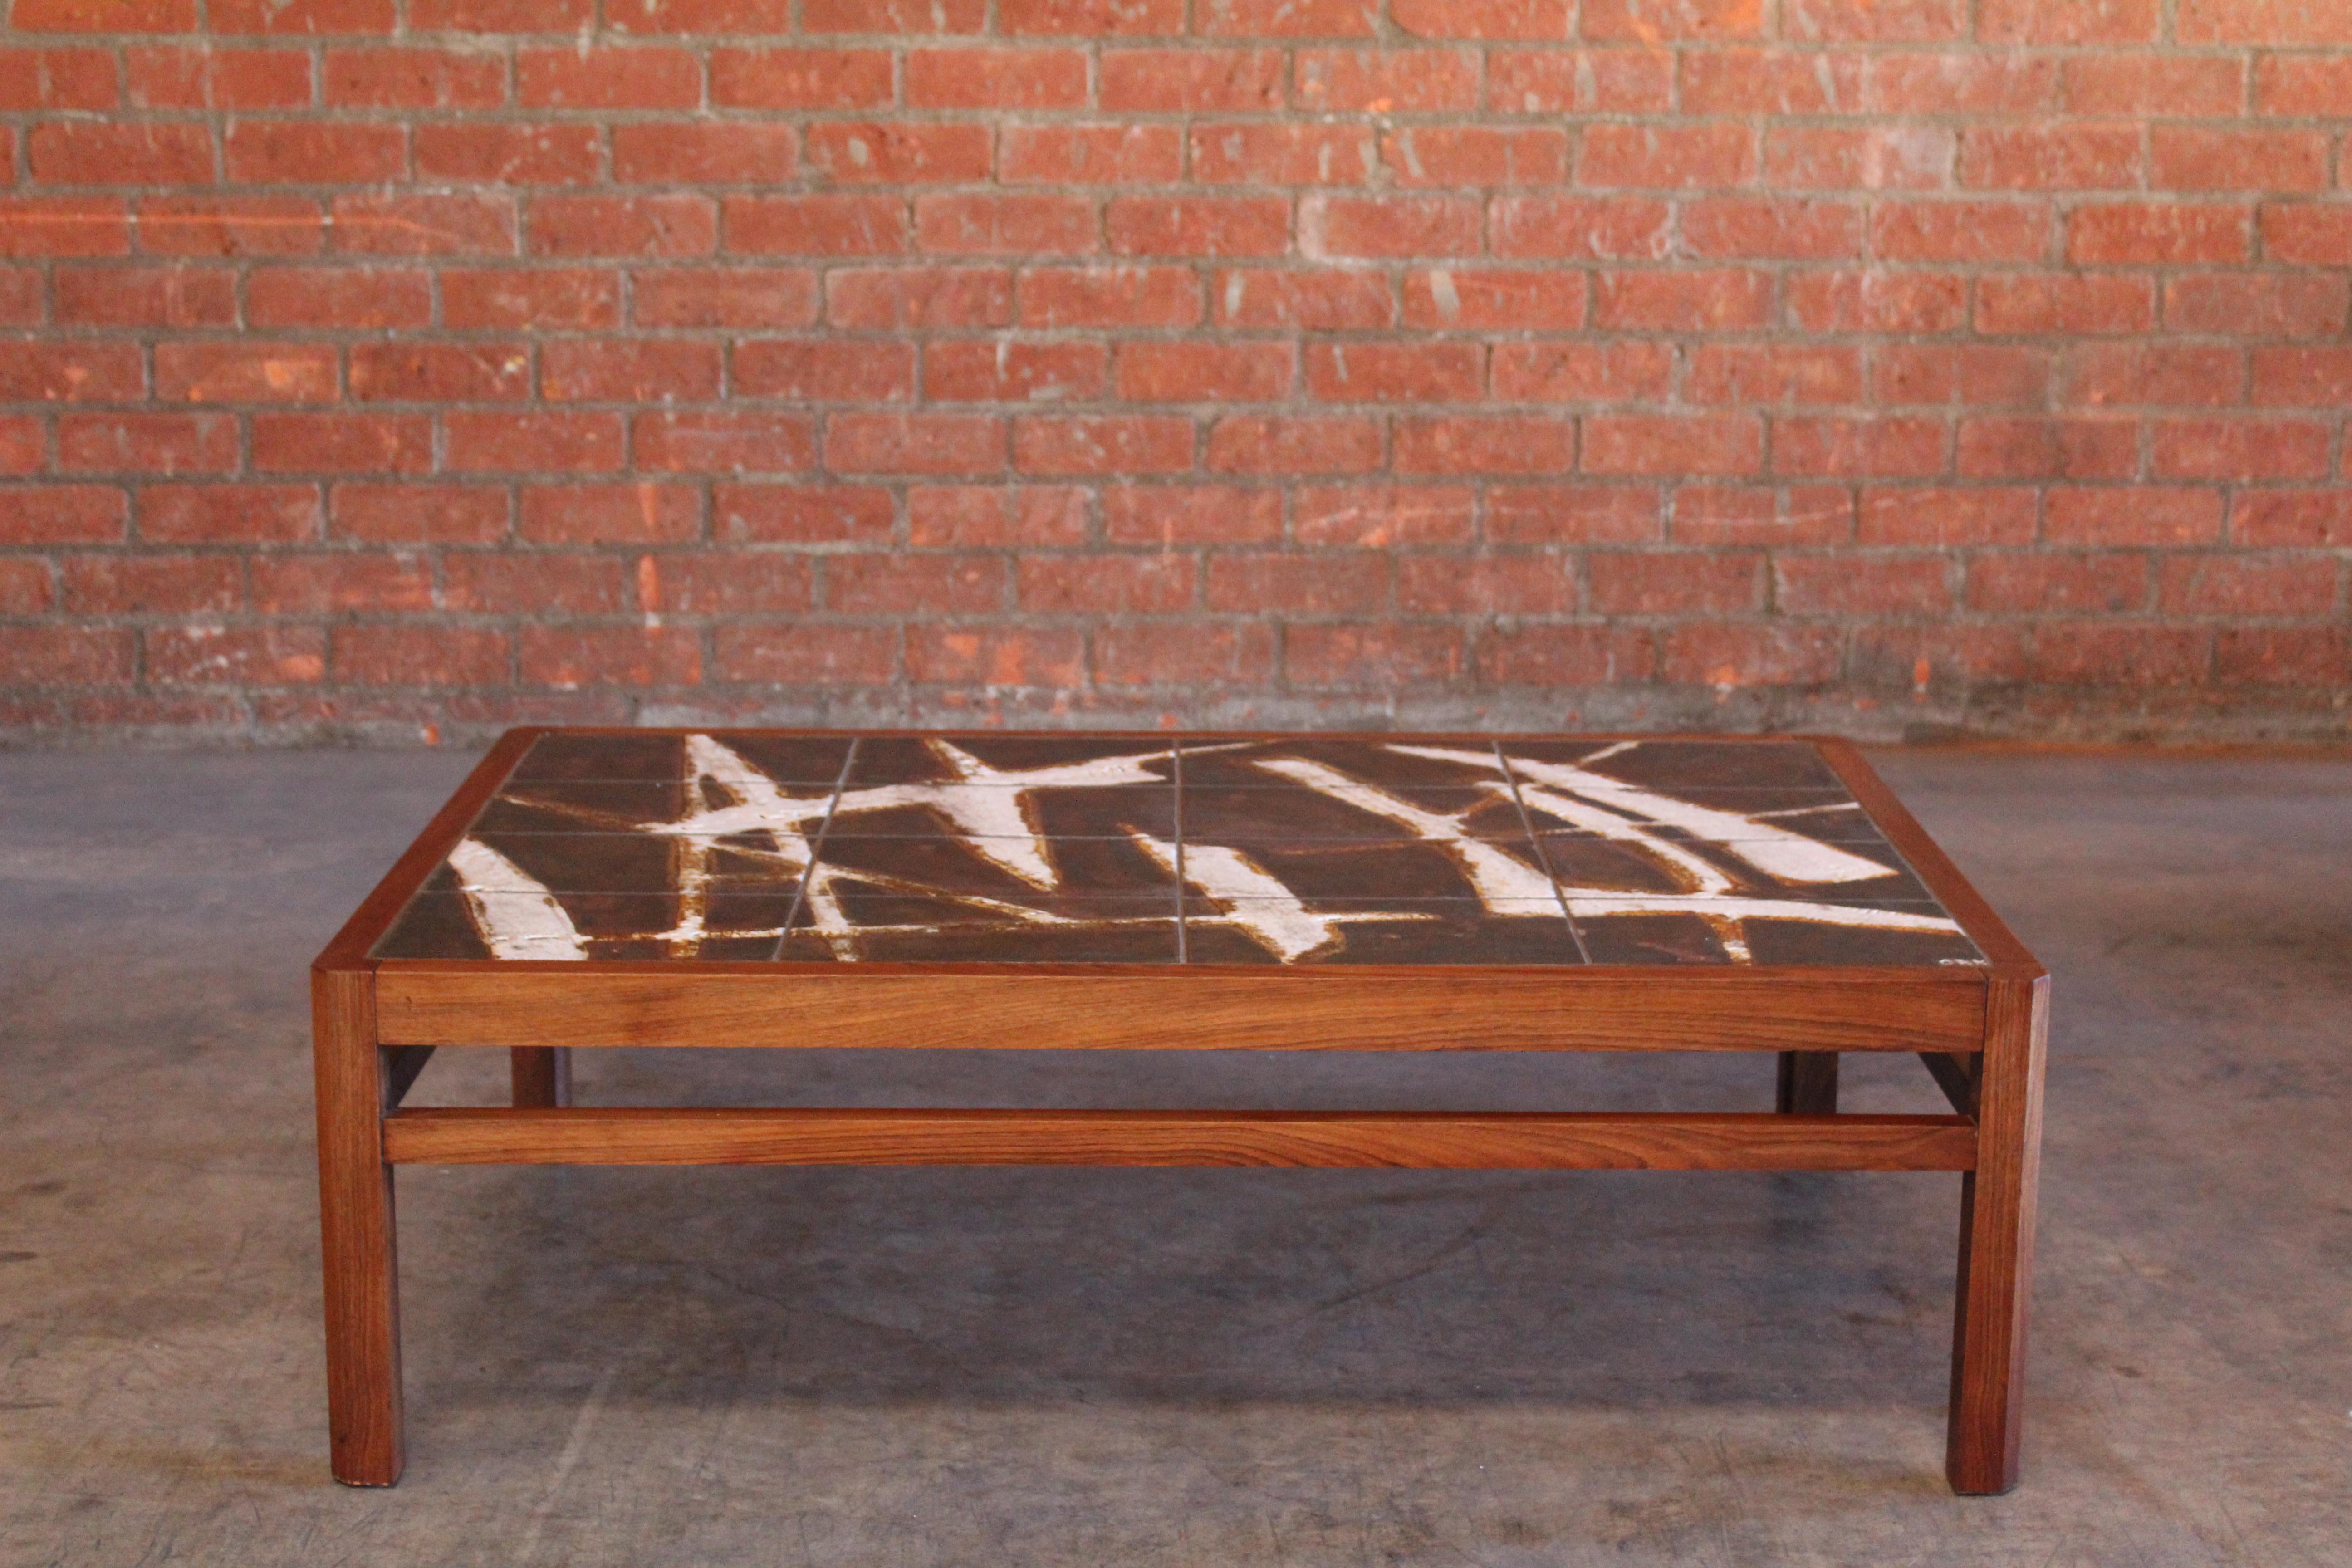 Vintage 1960s solid rosewood coffee table with abstract ceramic tiles designed by Ole Bjorn Krüger. In over all excellent condition.